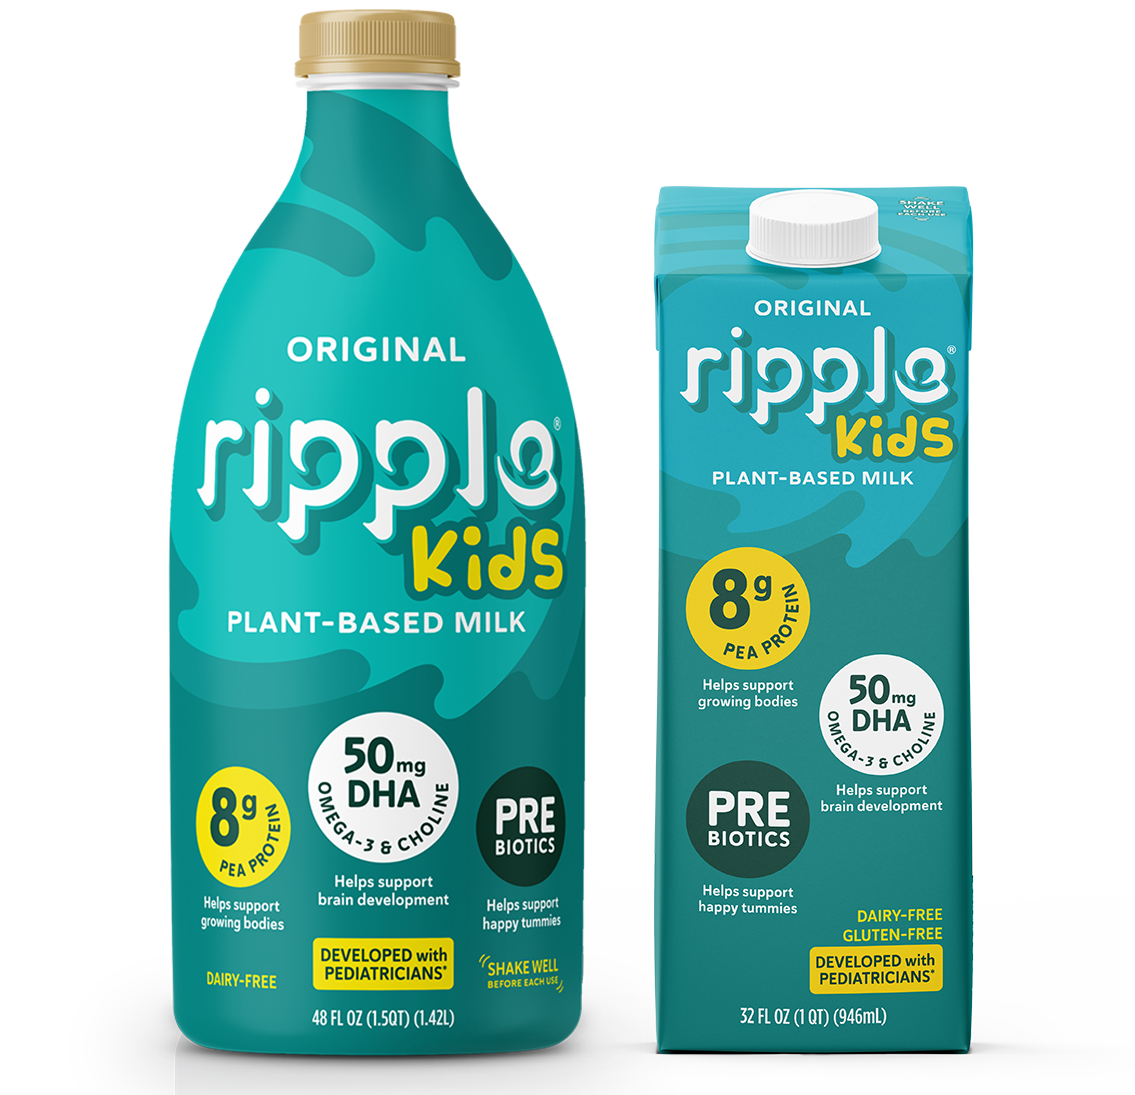 Ripple Foods Launches Unsweetened Version Of Kids’ Plant-Based Milk | Nutraceuticals World